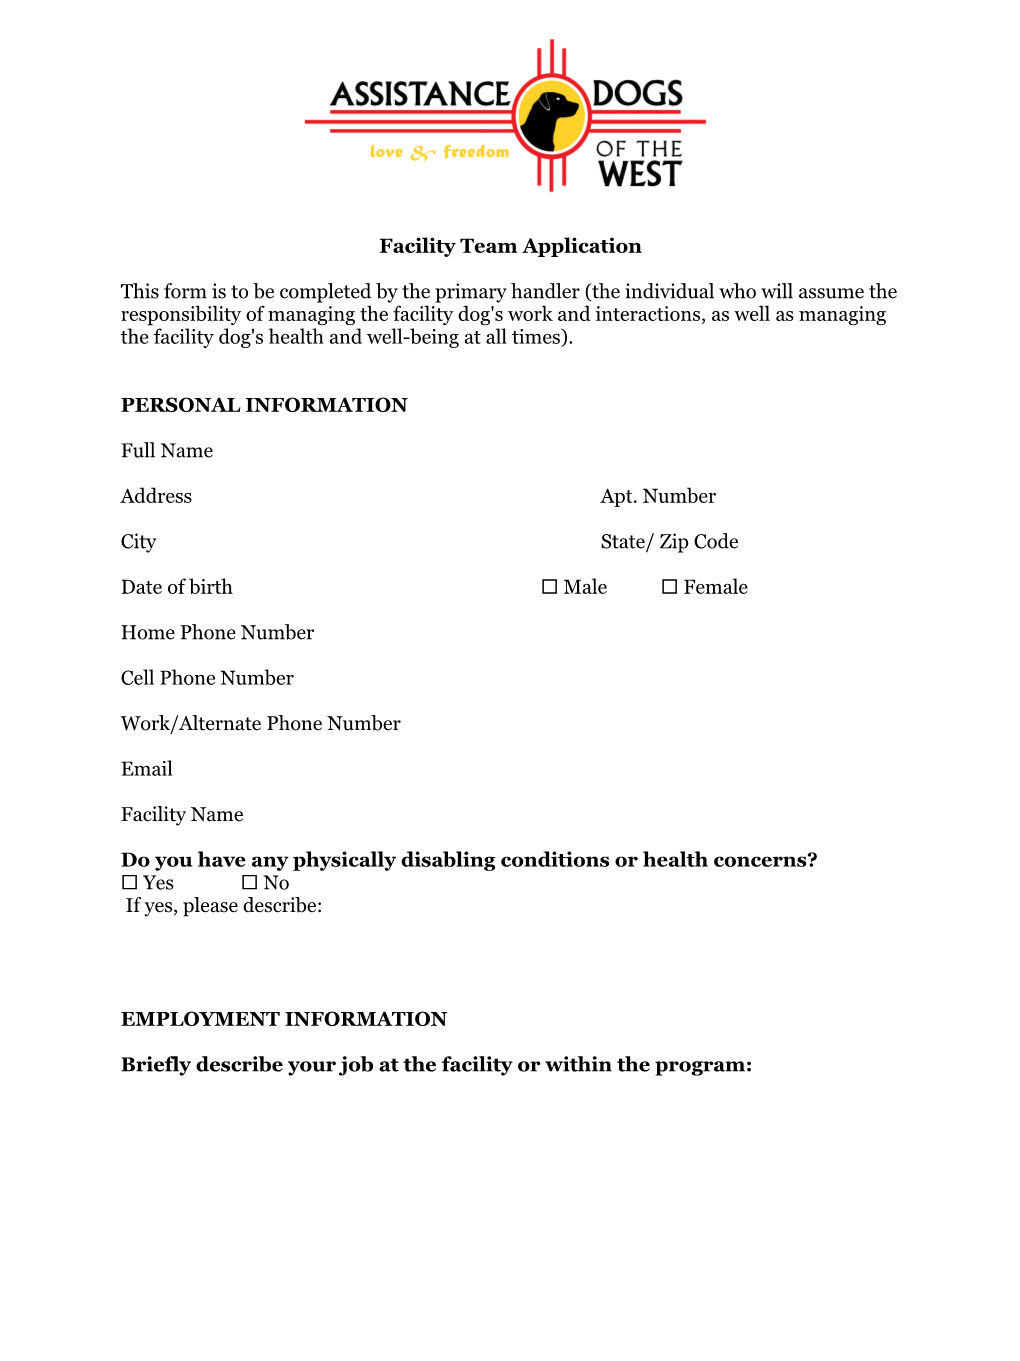 Completed Facility Team Application Form